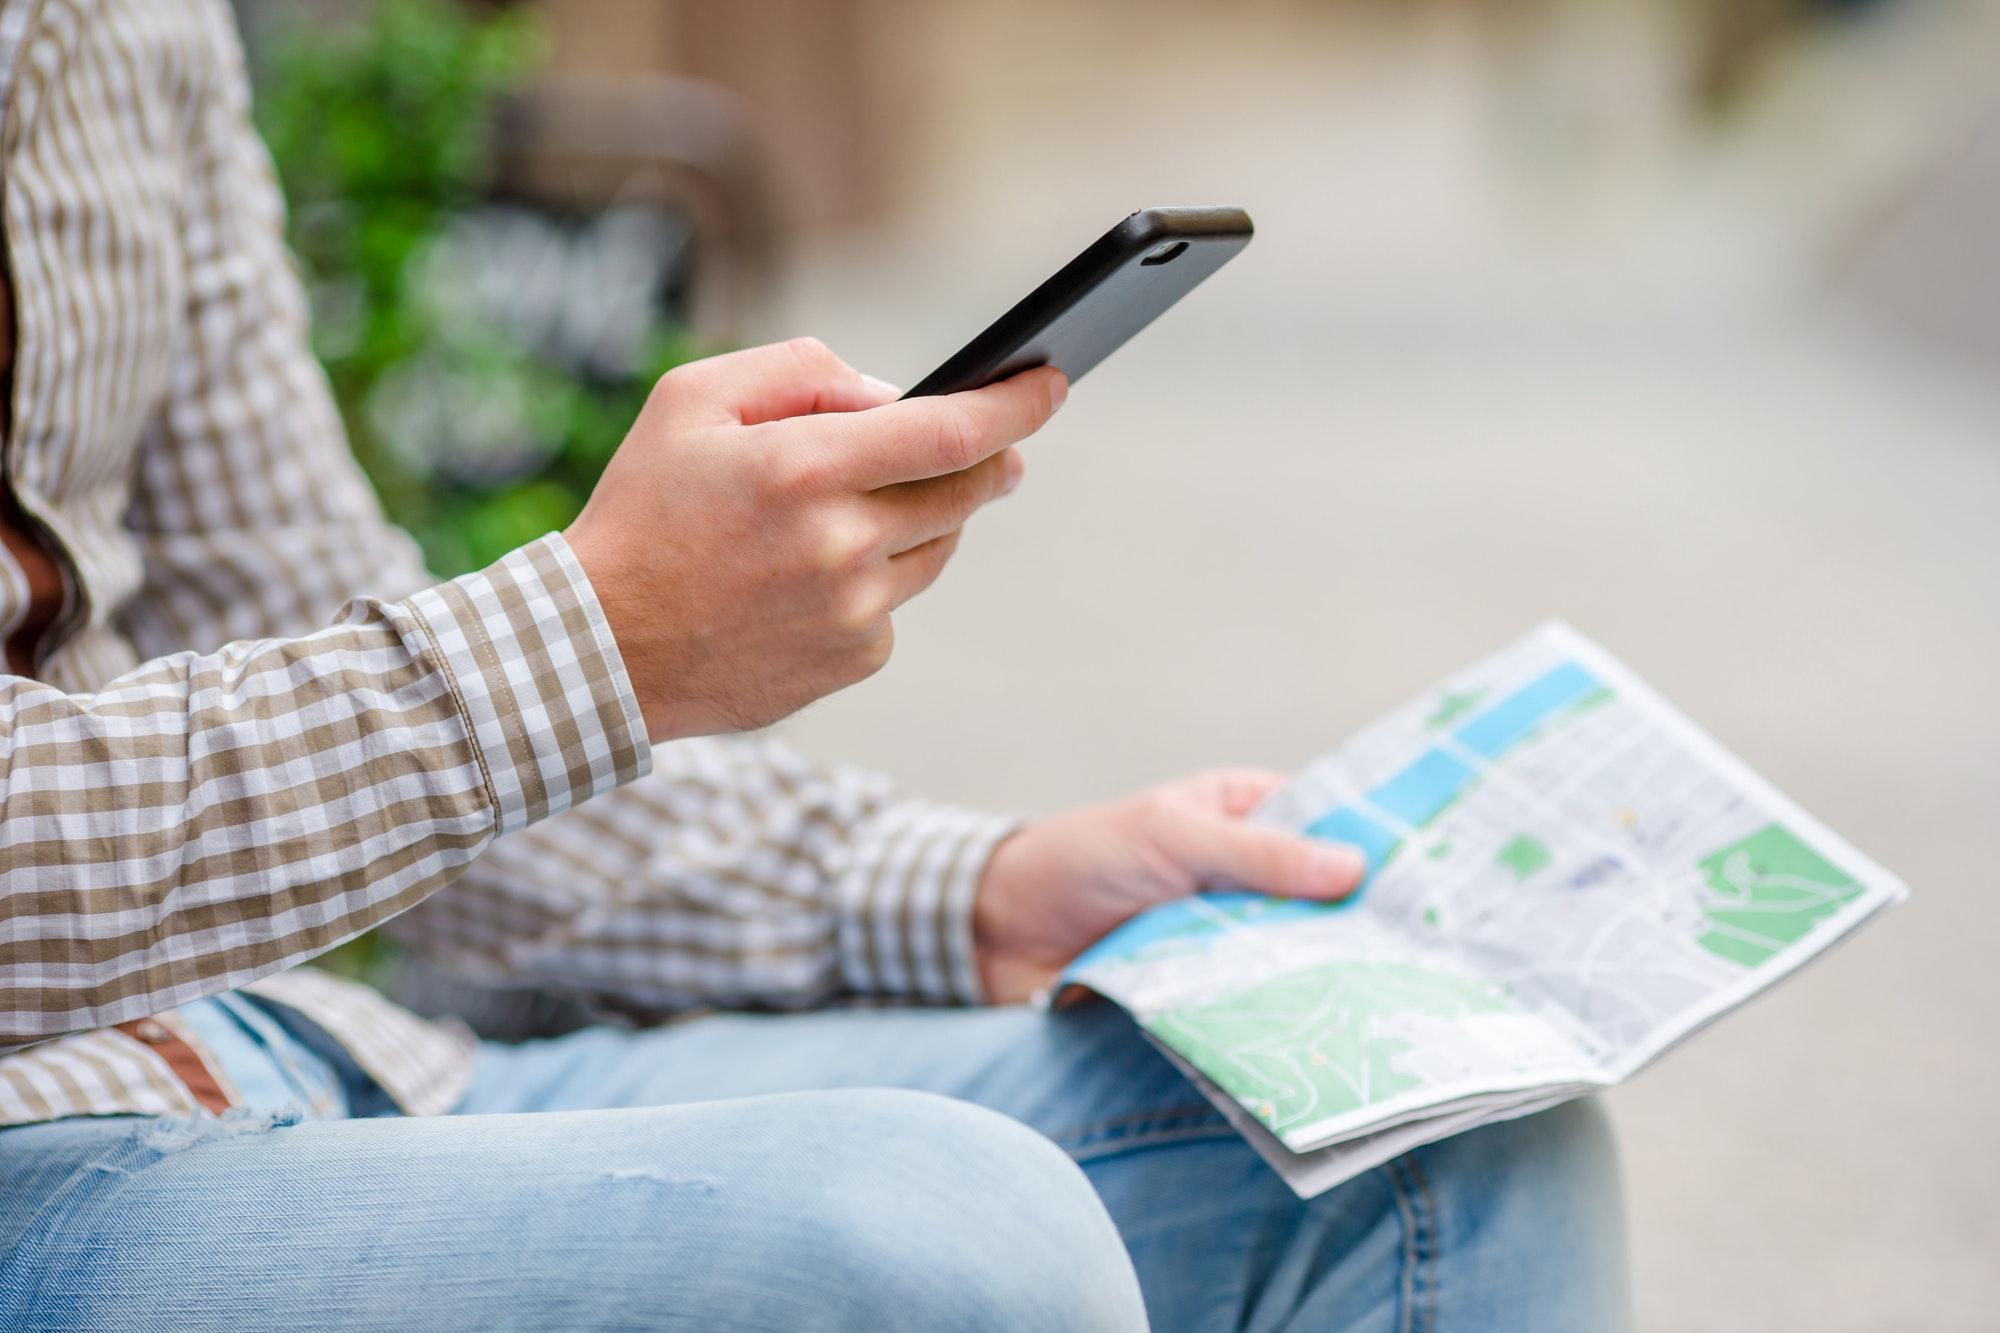 Closeup of male hands holding cellphone and city map outdoors on the street. Man using mobile